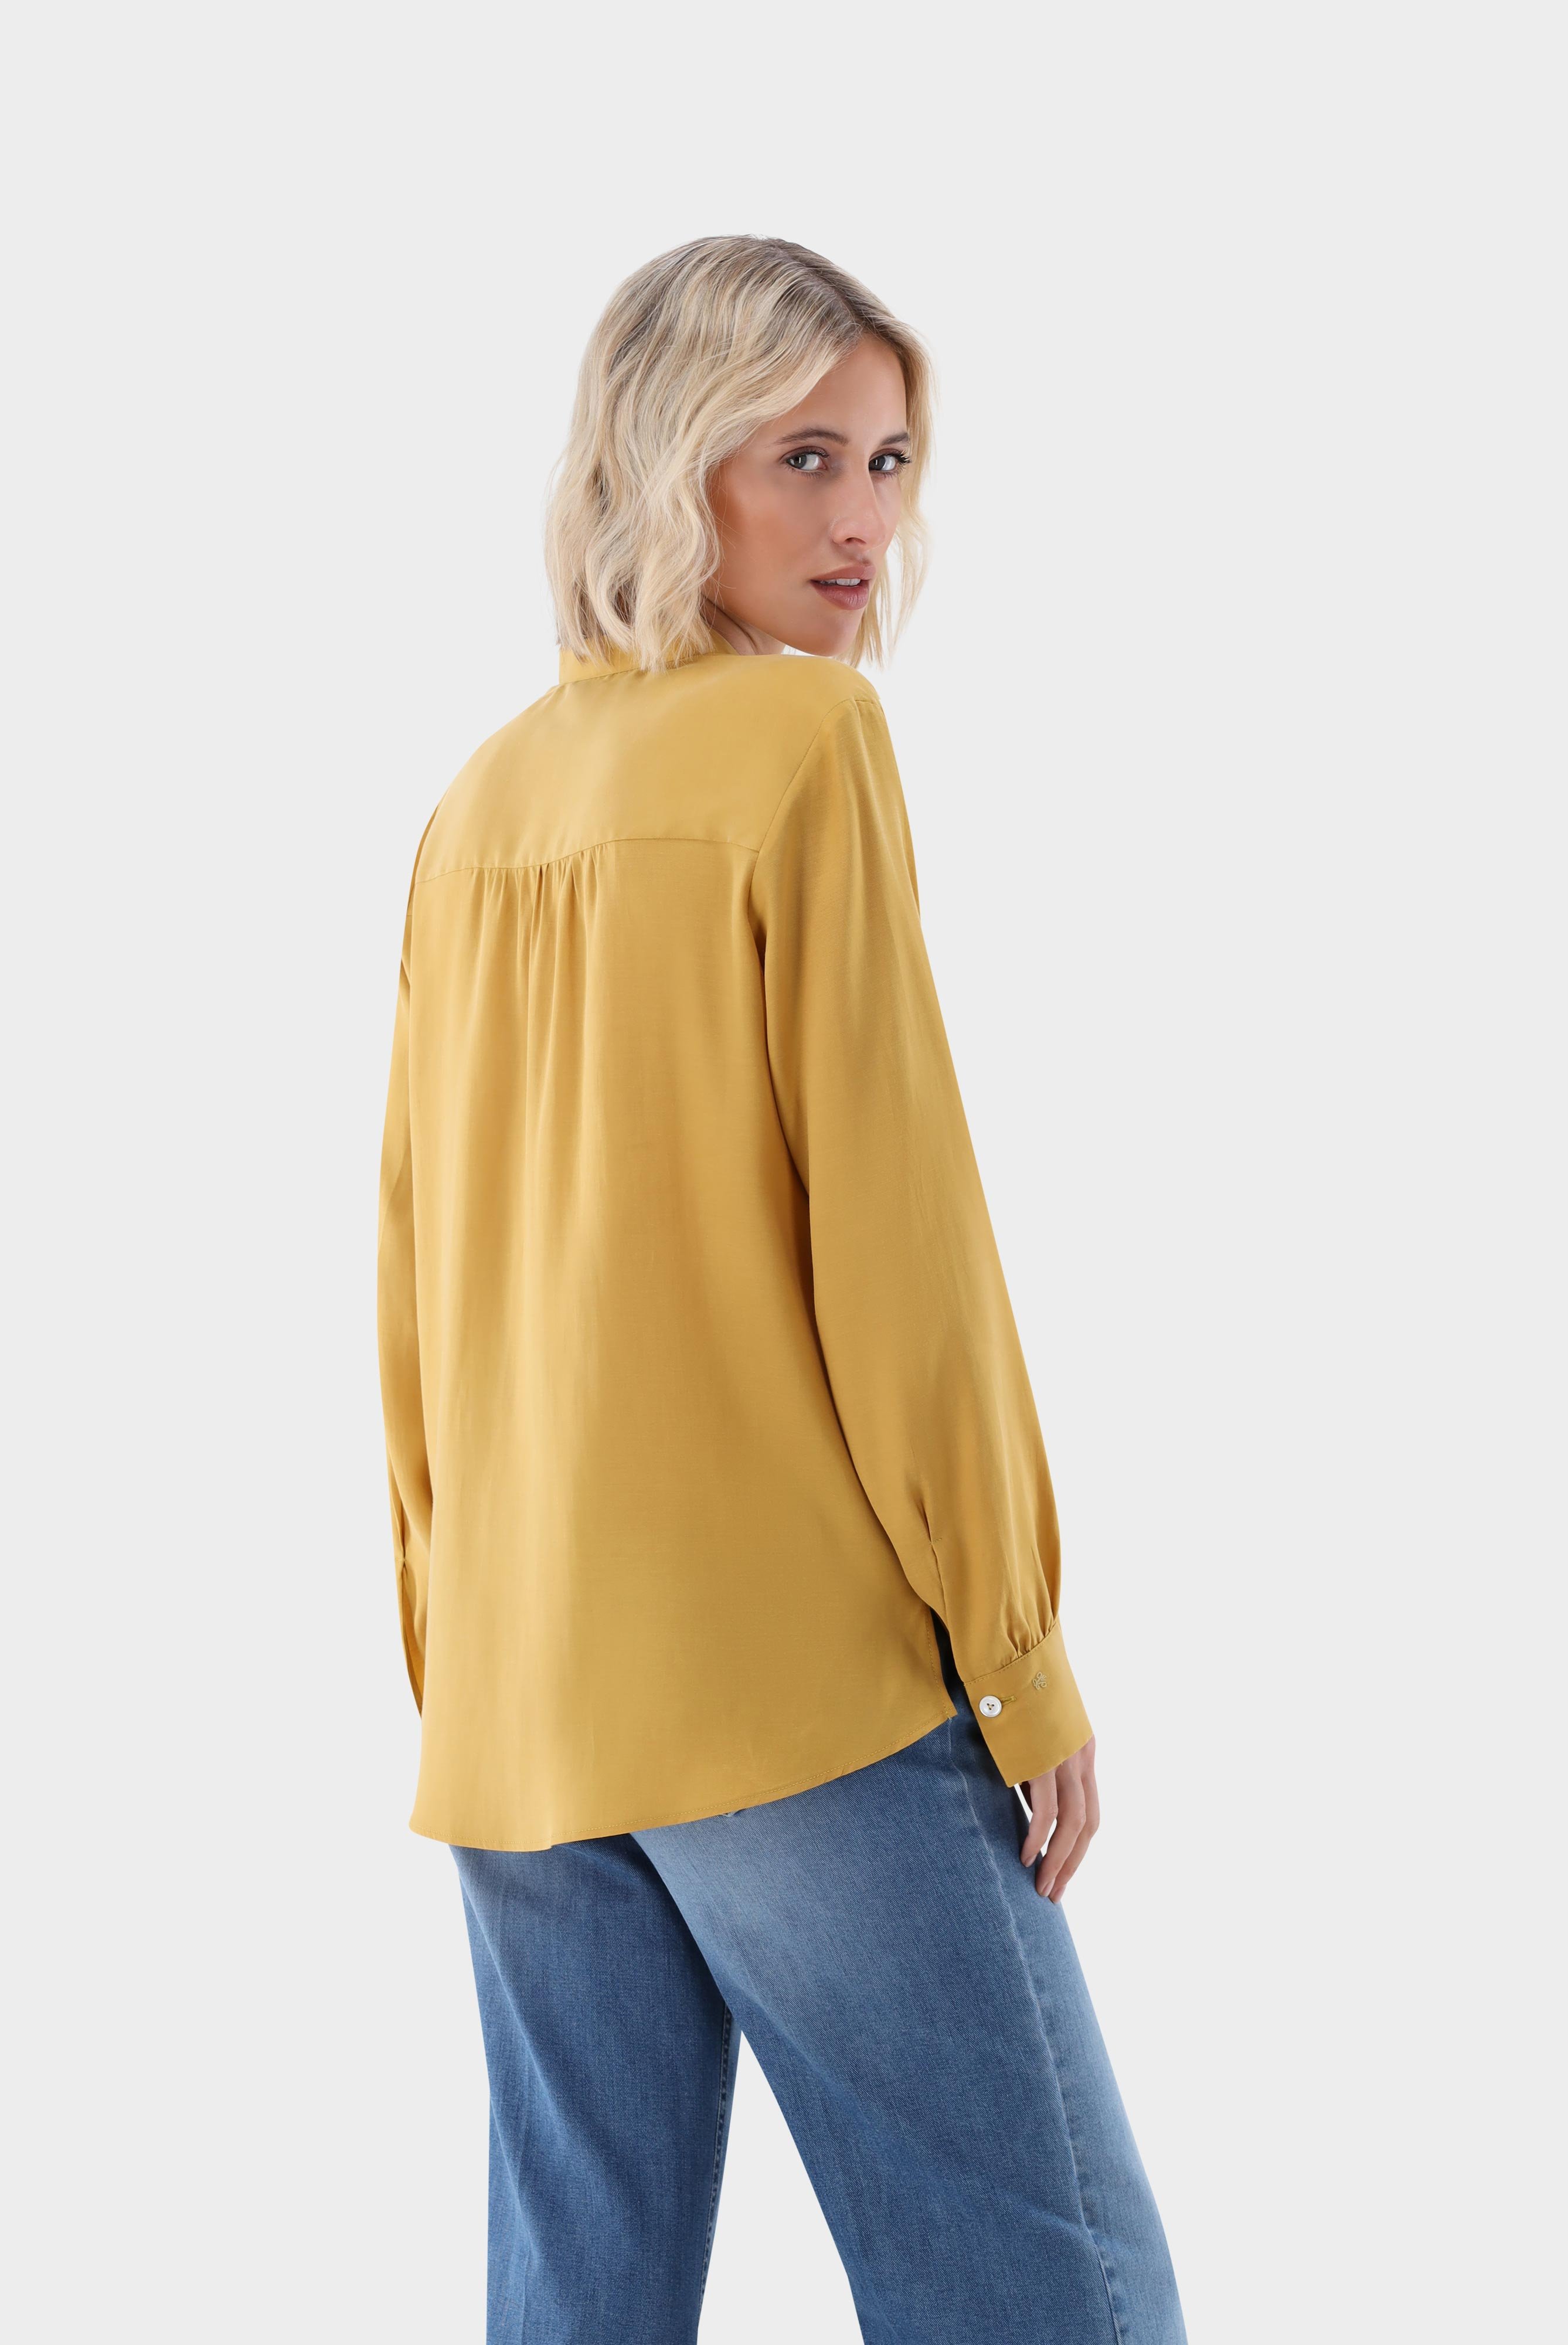 Casual Blouses+Stand-up Collar Shirt with lyocell and cotton+05.527Y.49.150258.270.32